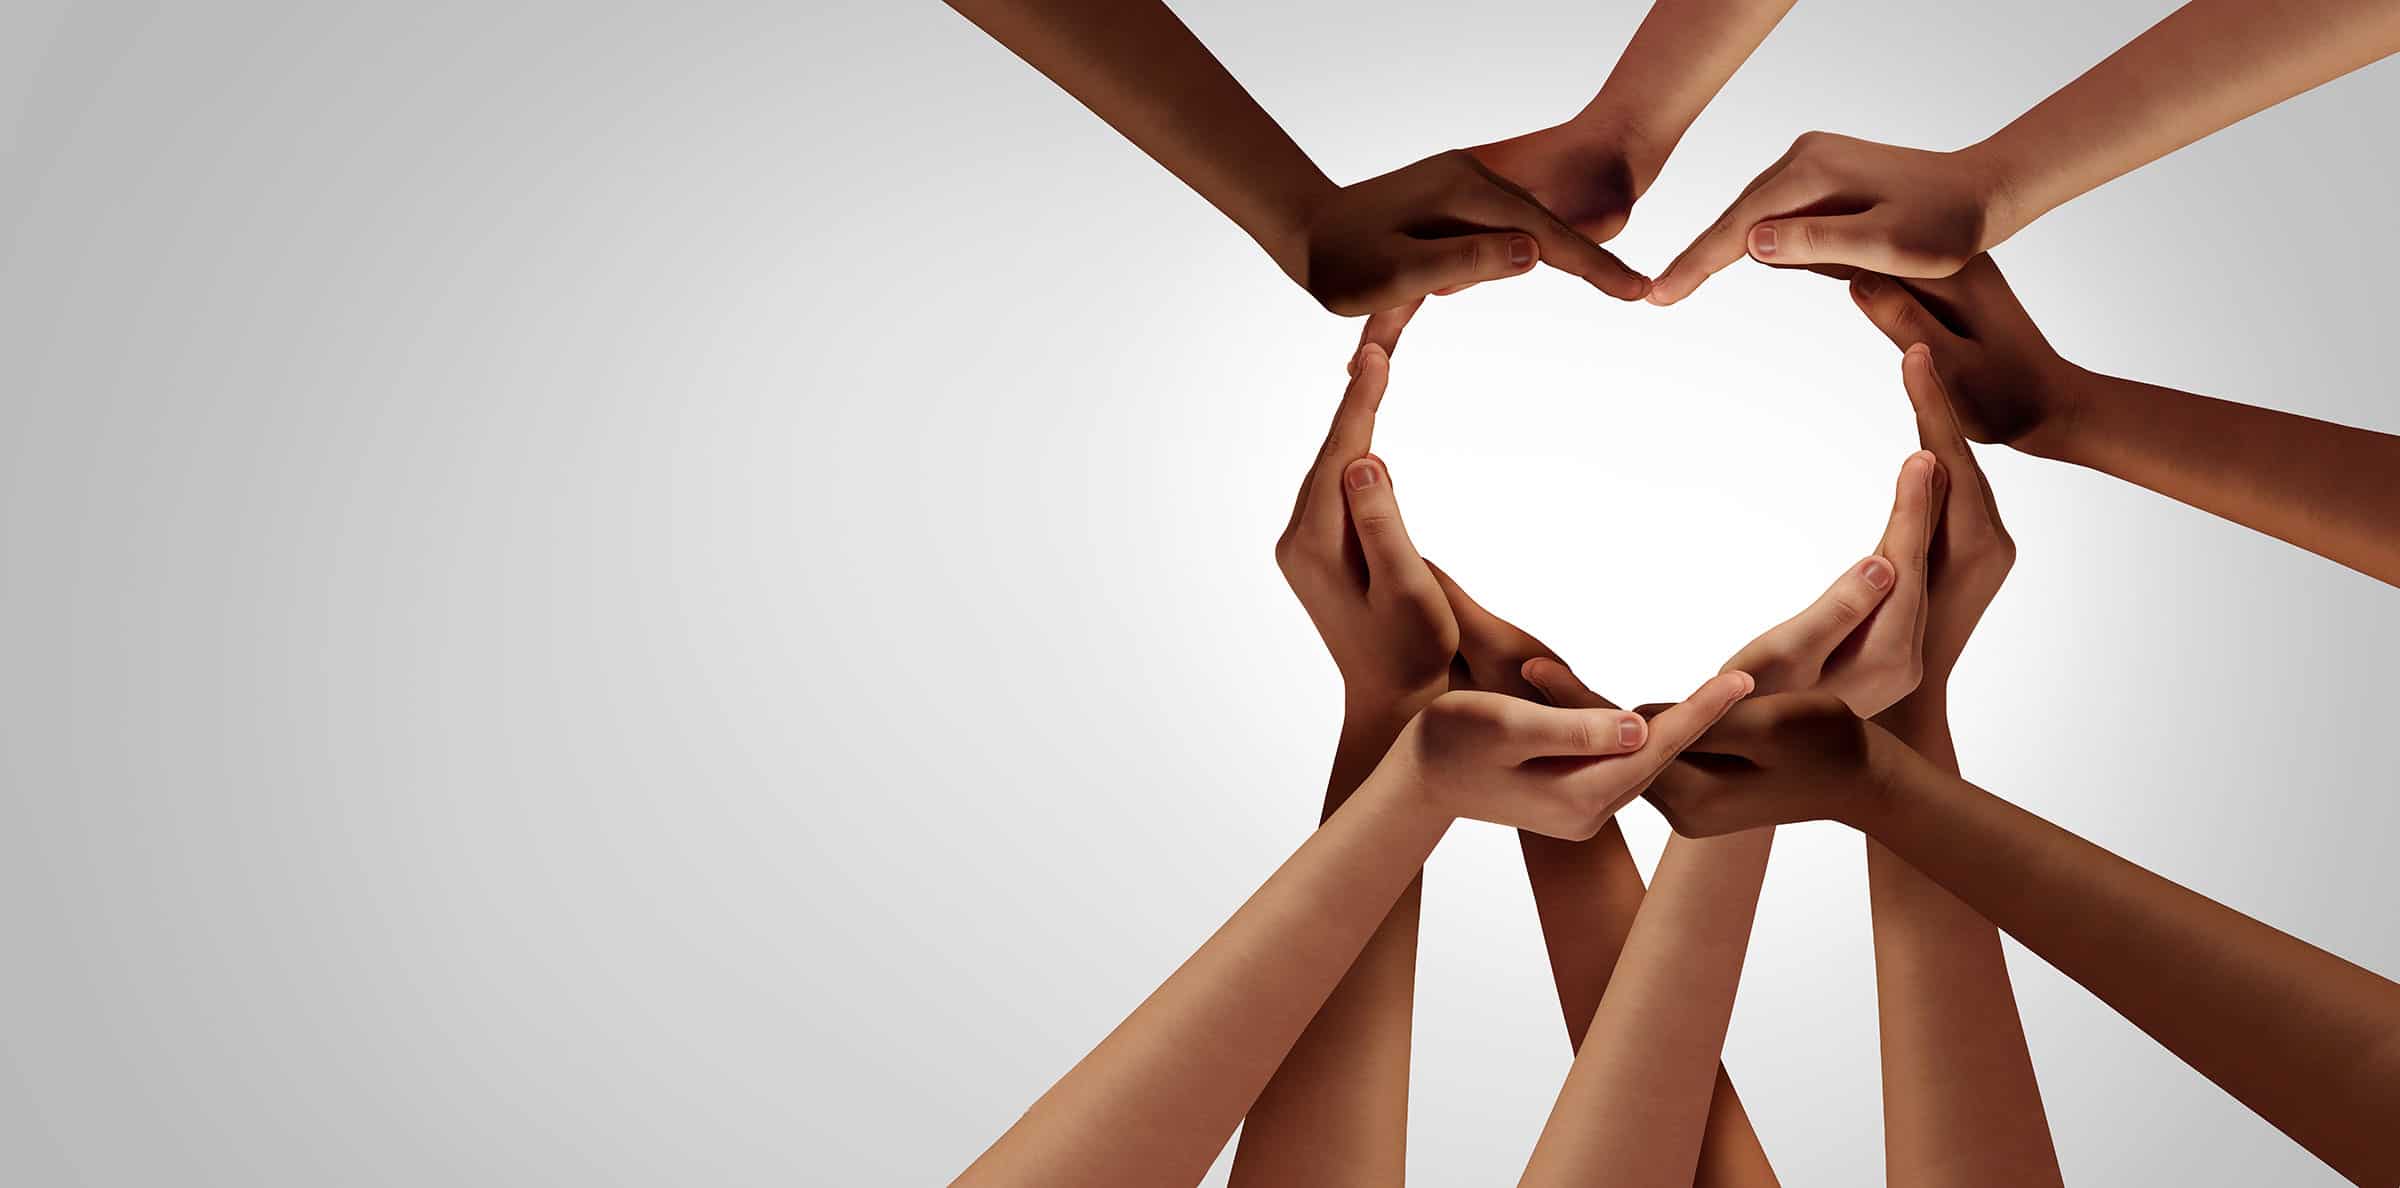 Several hands forming the shape of a heart.